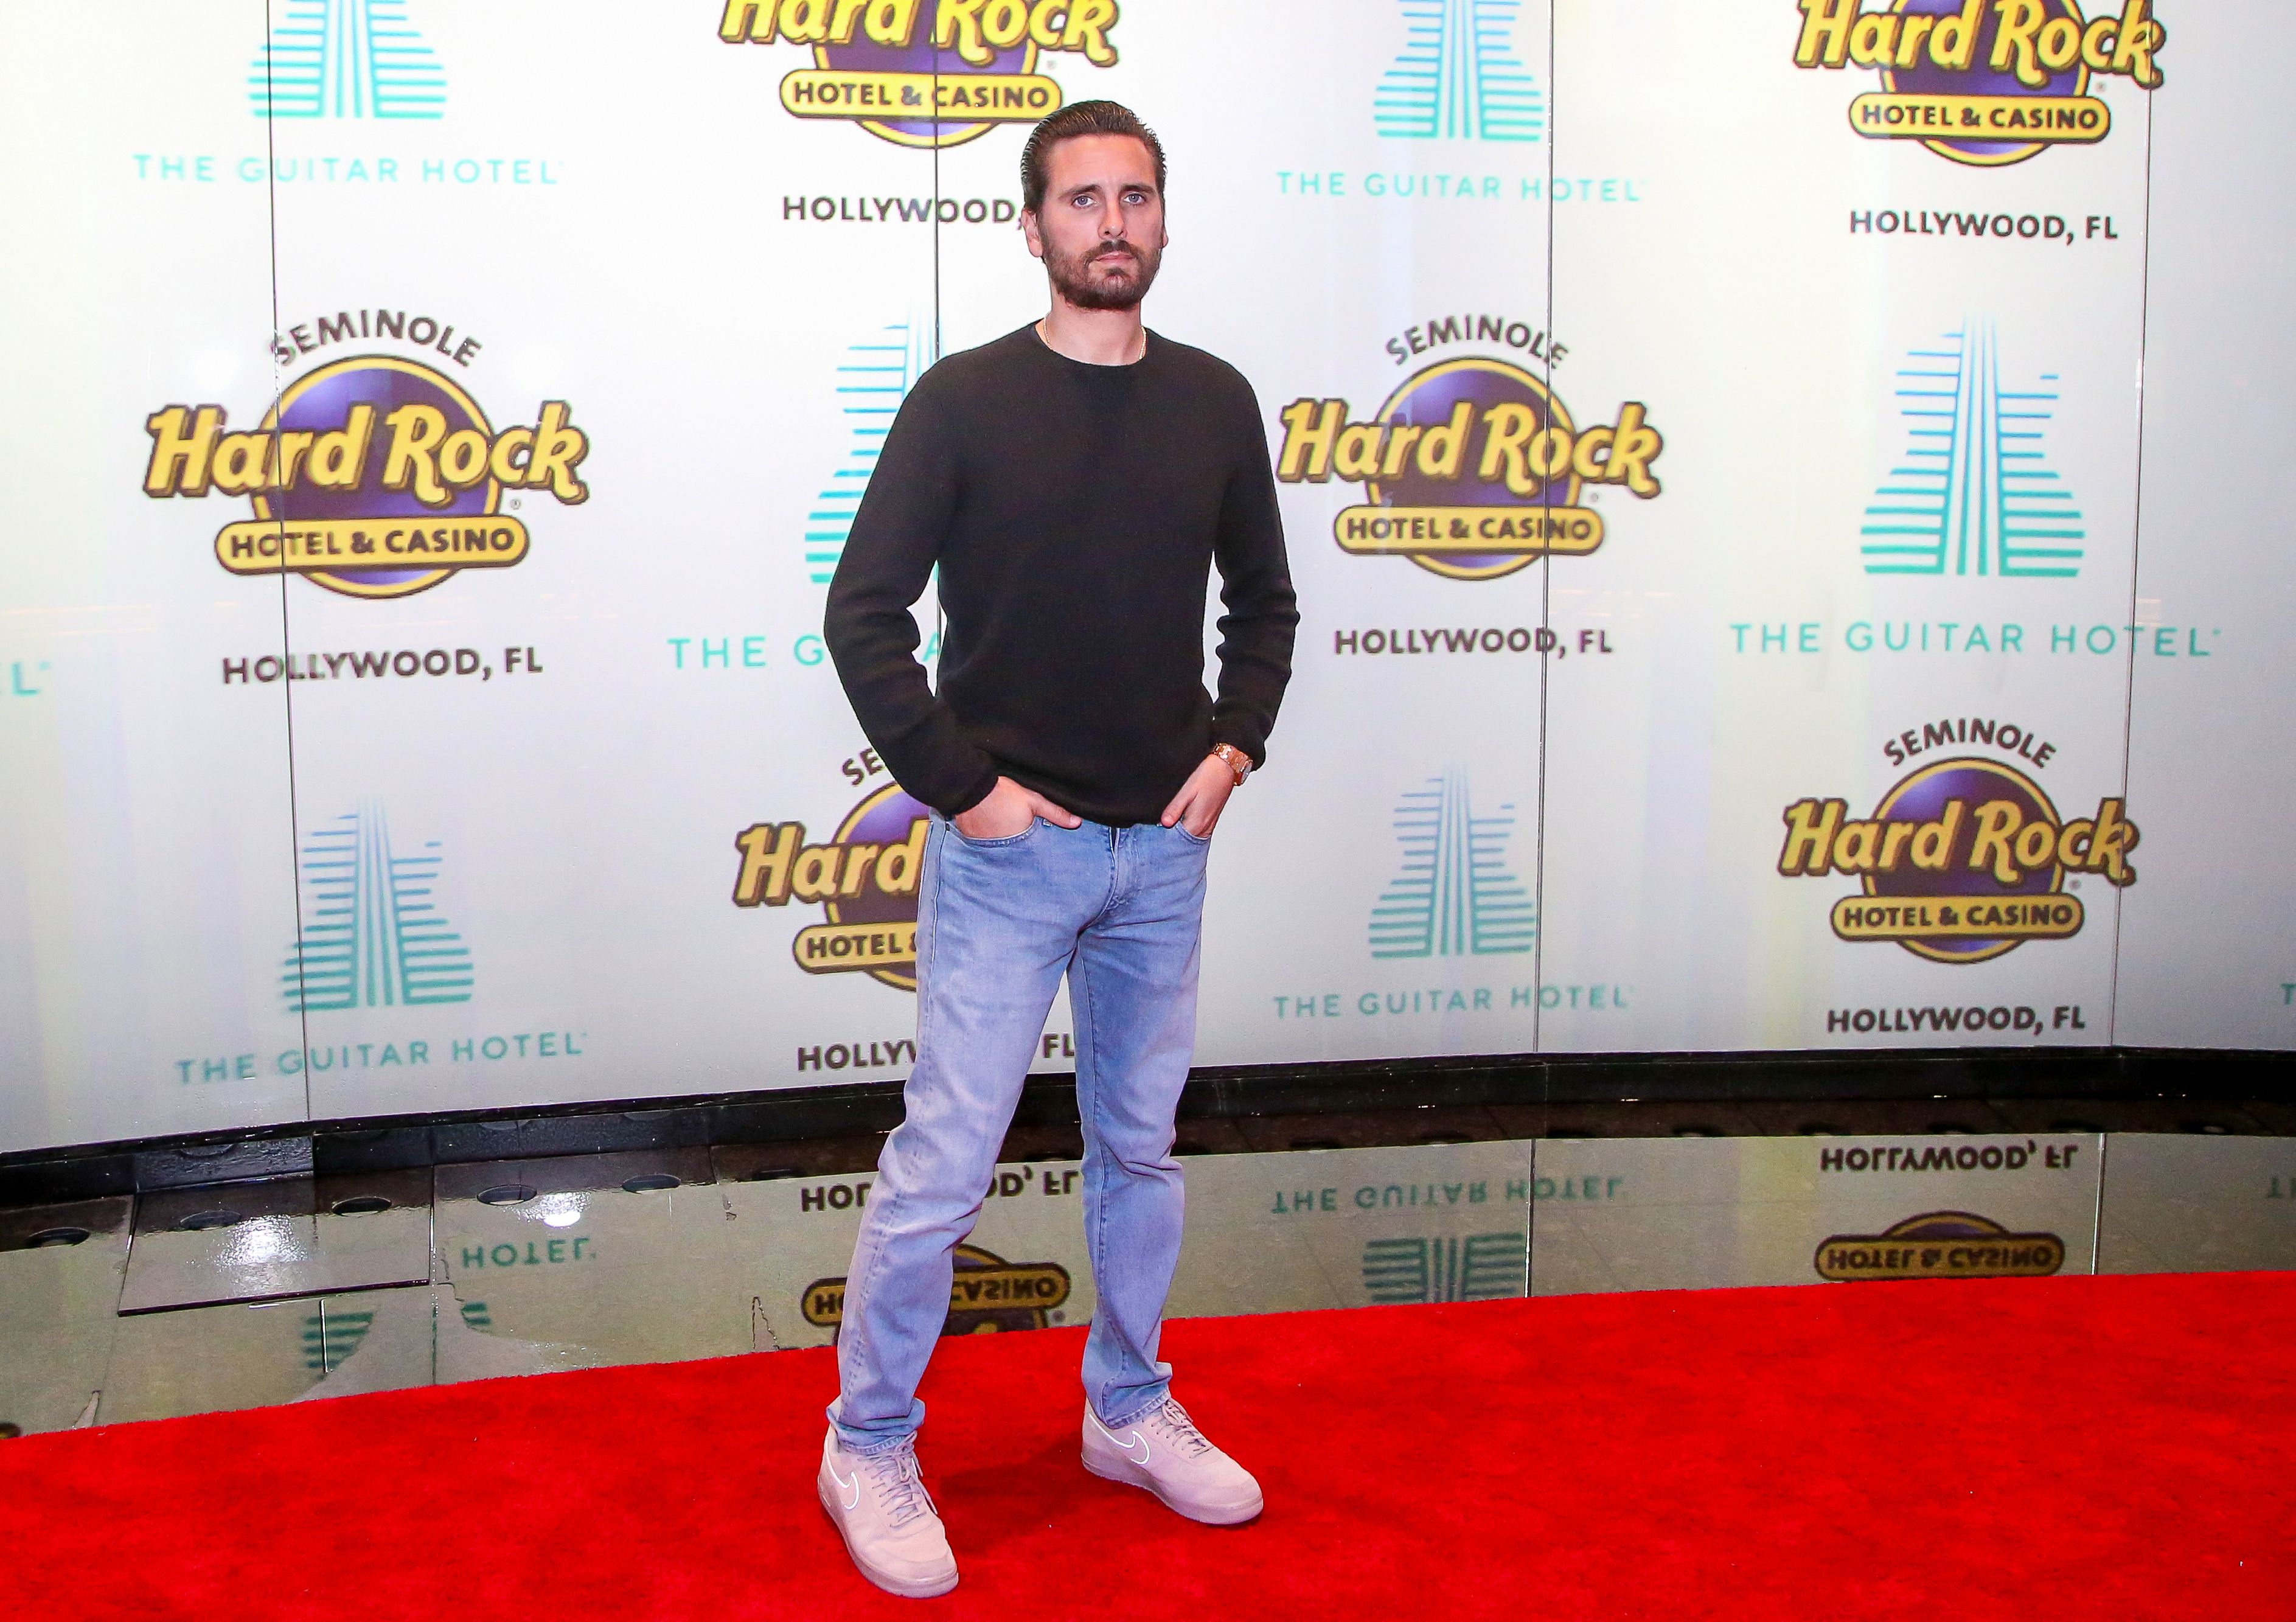 Scott Disick attends the Grand Opening of the Guitar Hotel expansion at Seminole Hard Rock Hotel